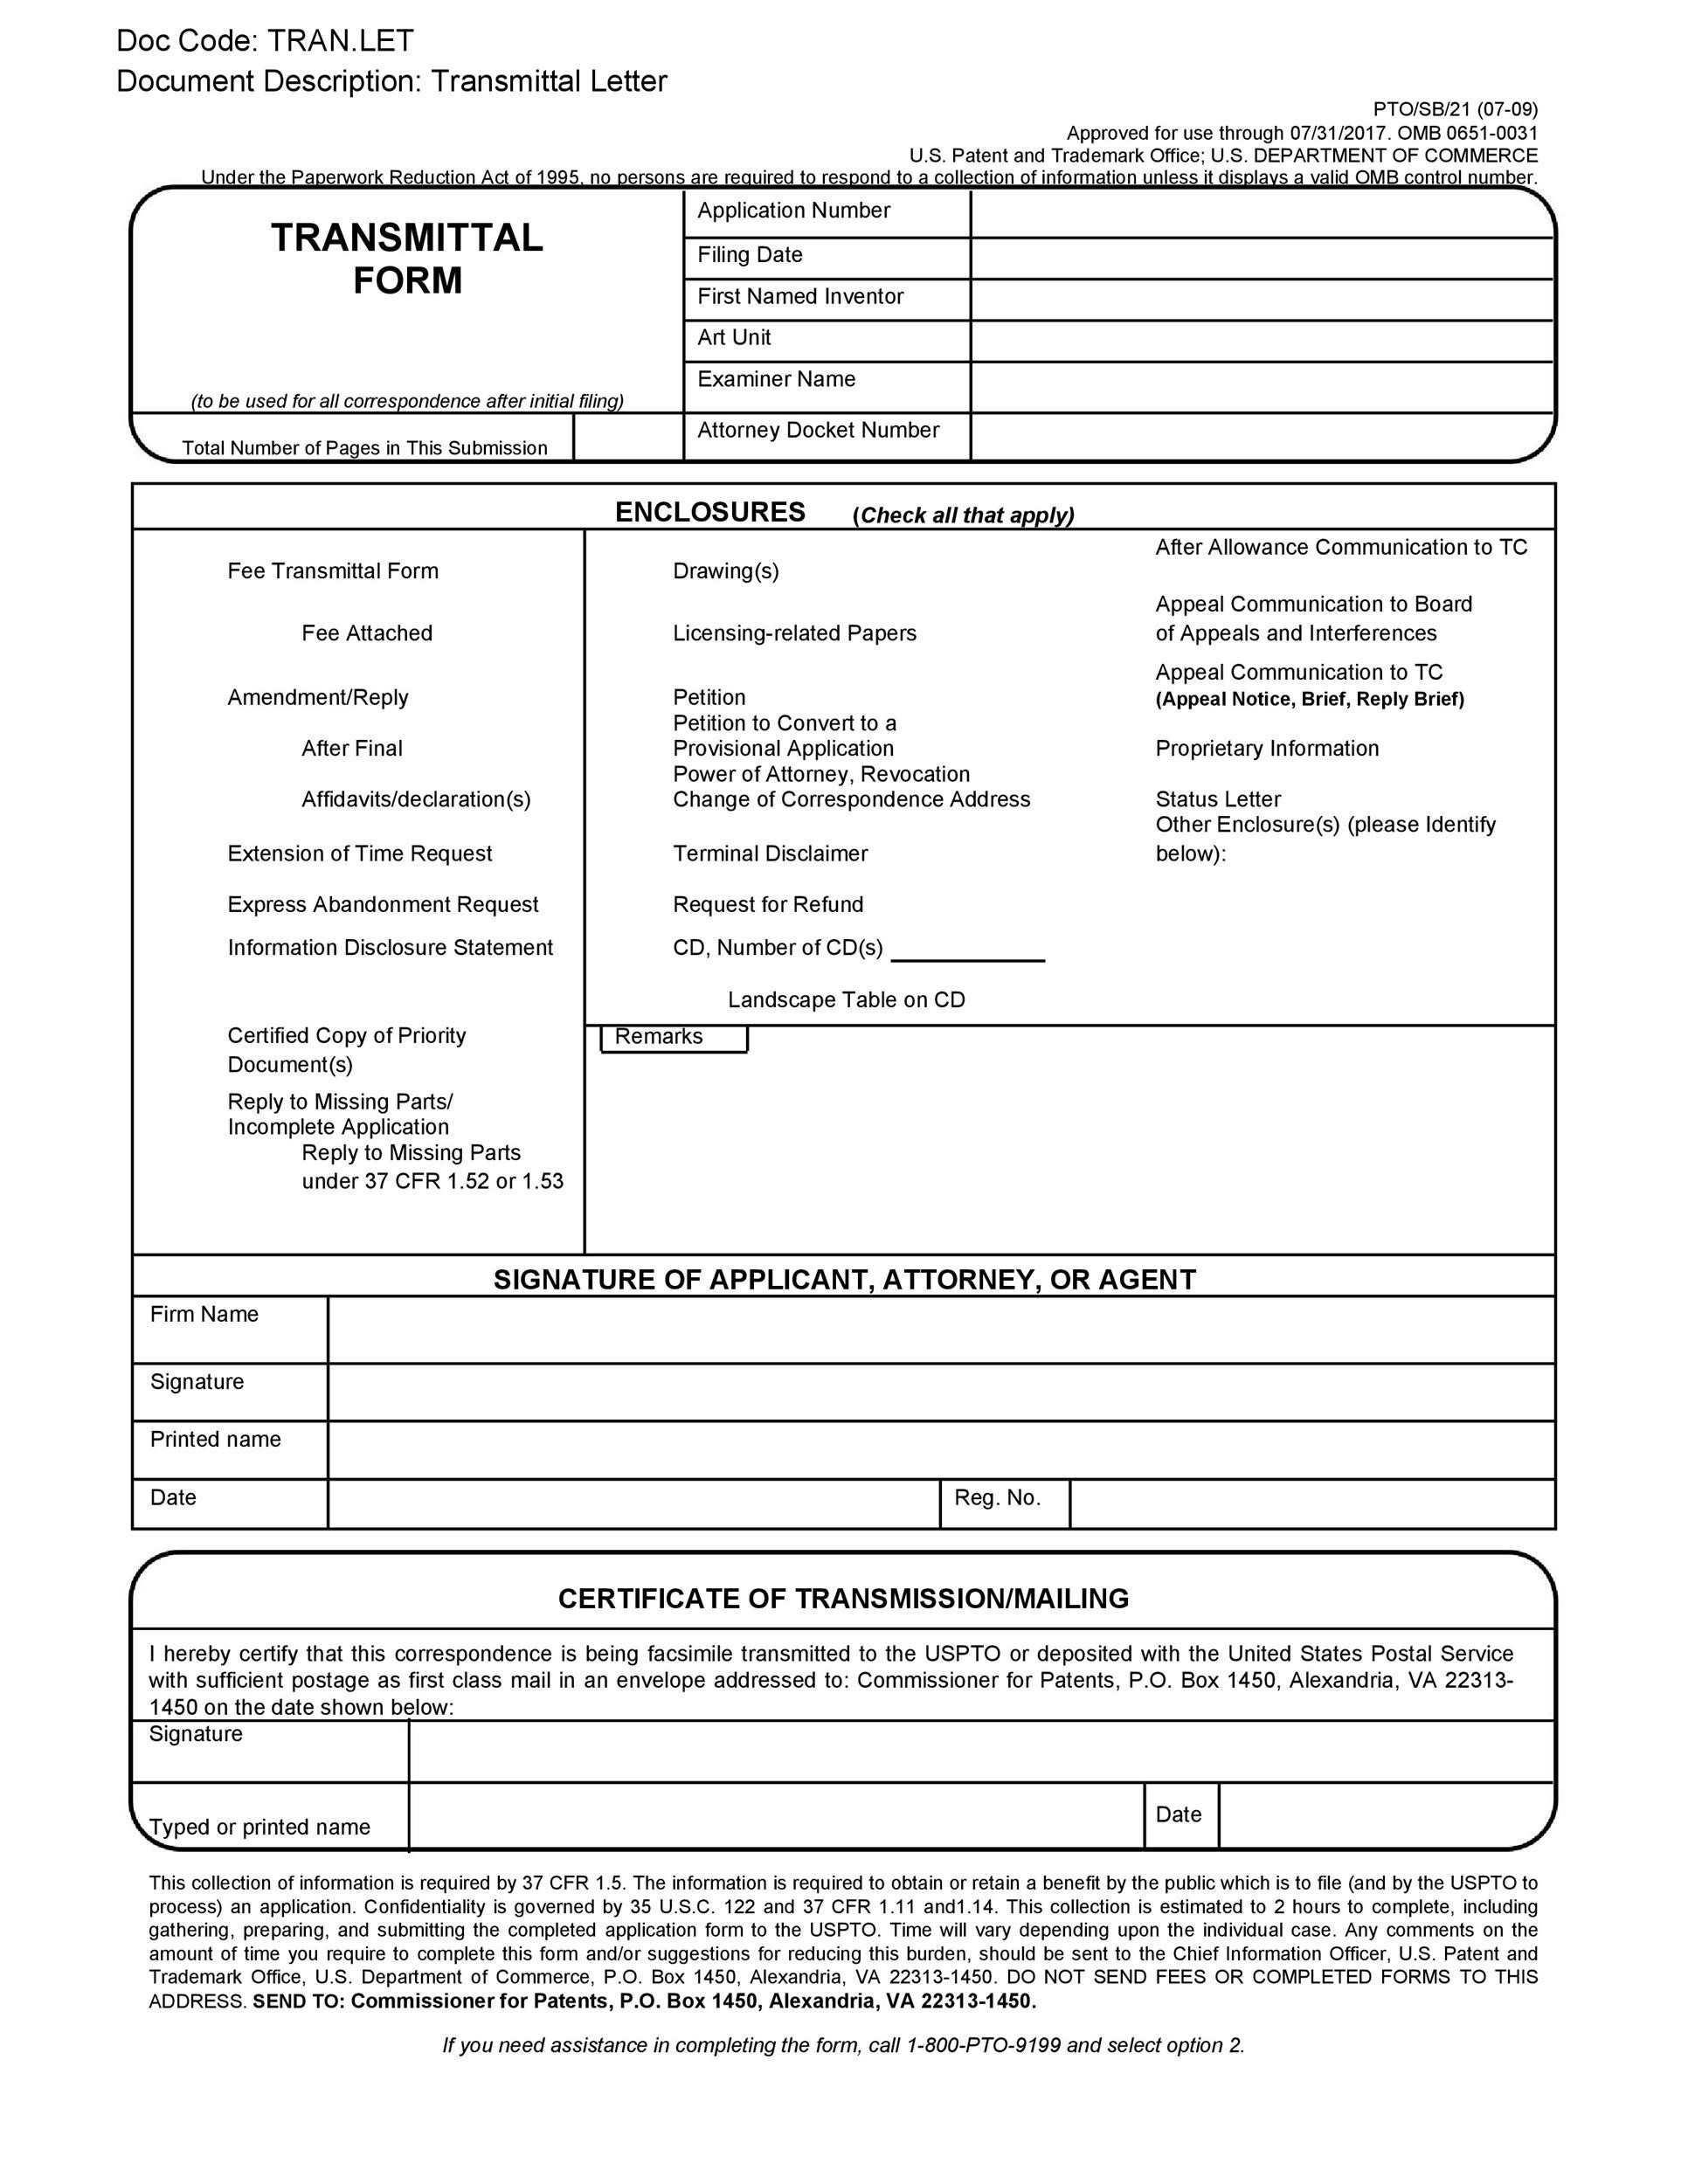 Letter Of Transmittal 40 Great Examples Templates TemplateLab